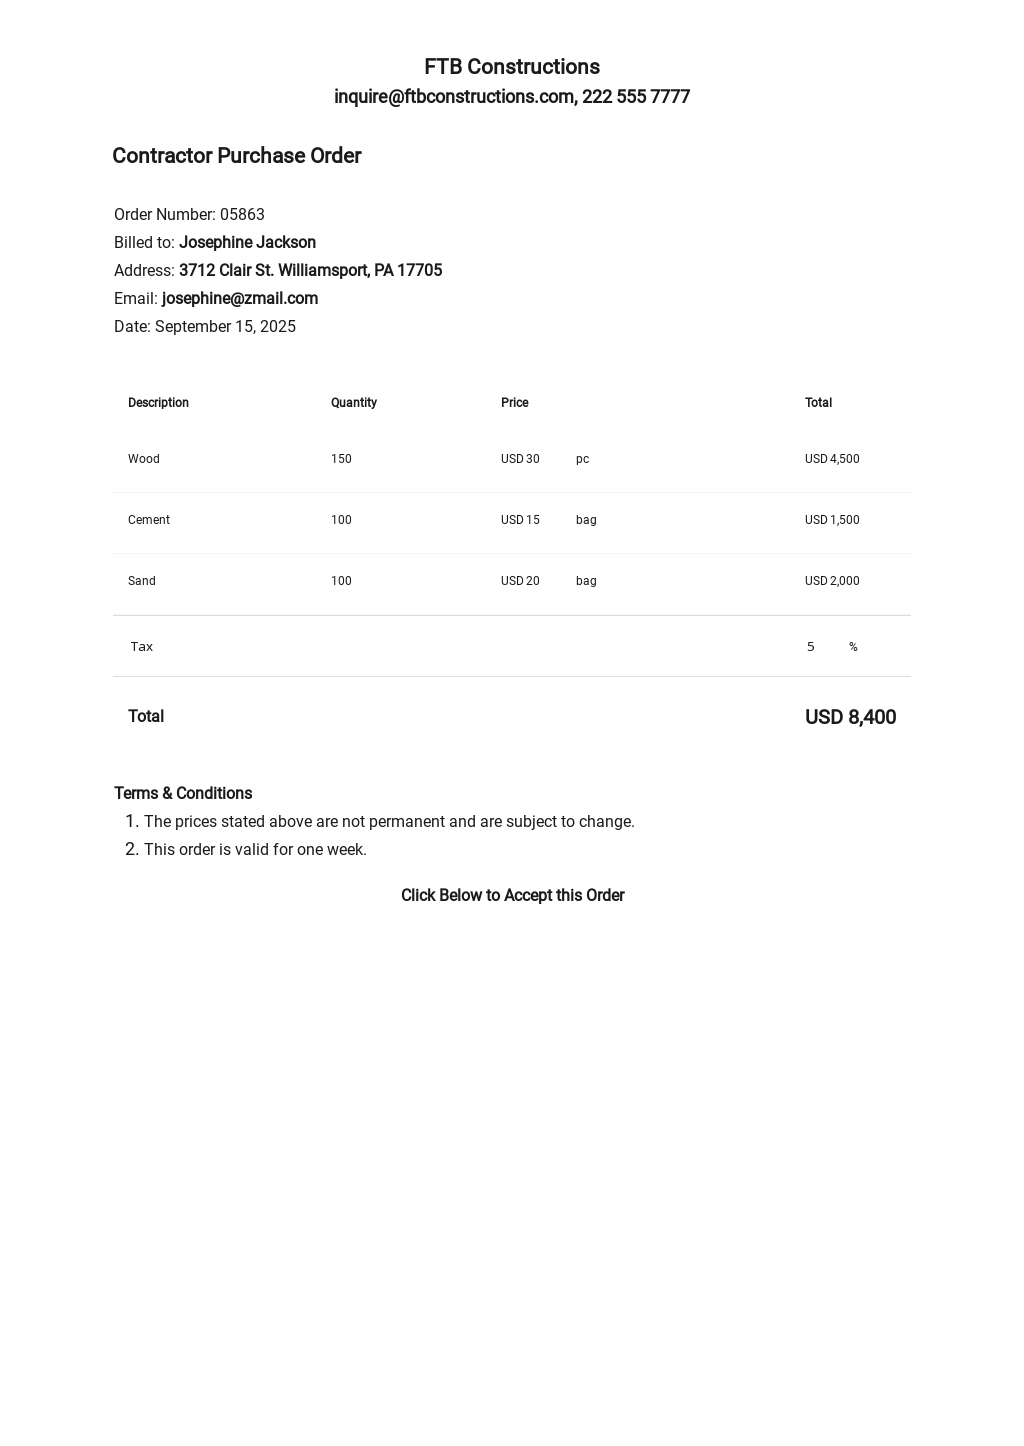 Contractor Purchase Order Template.jpe